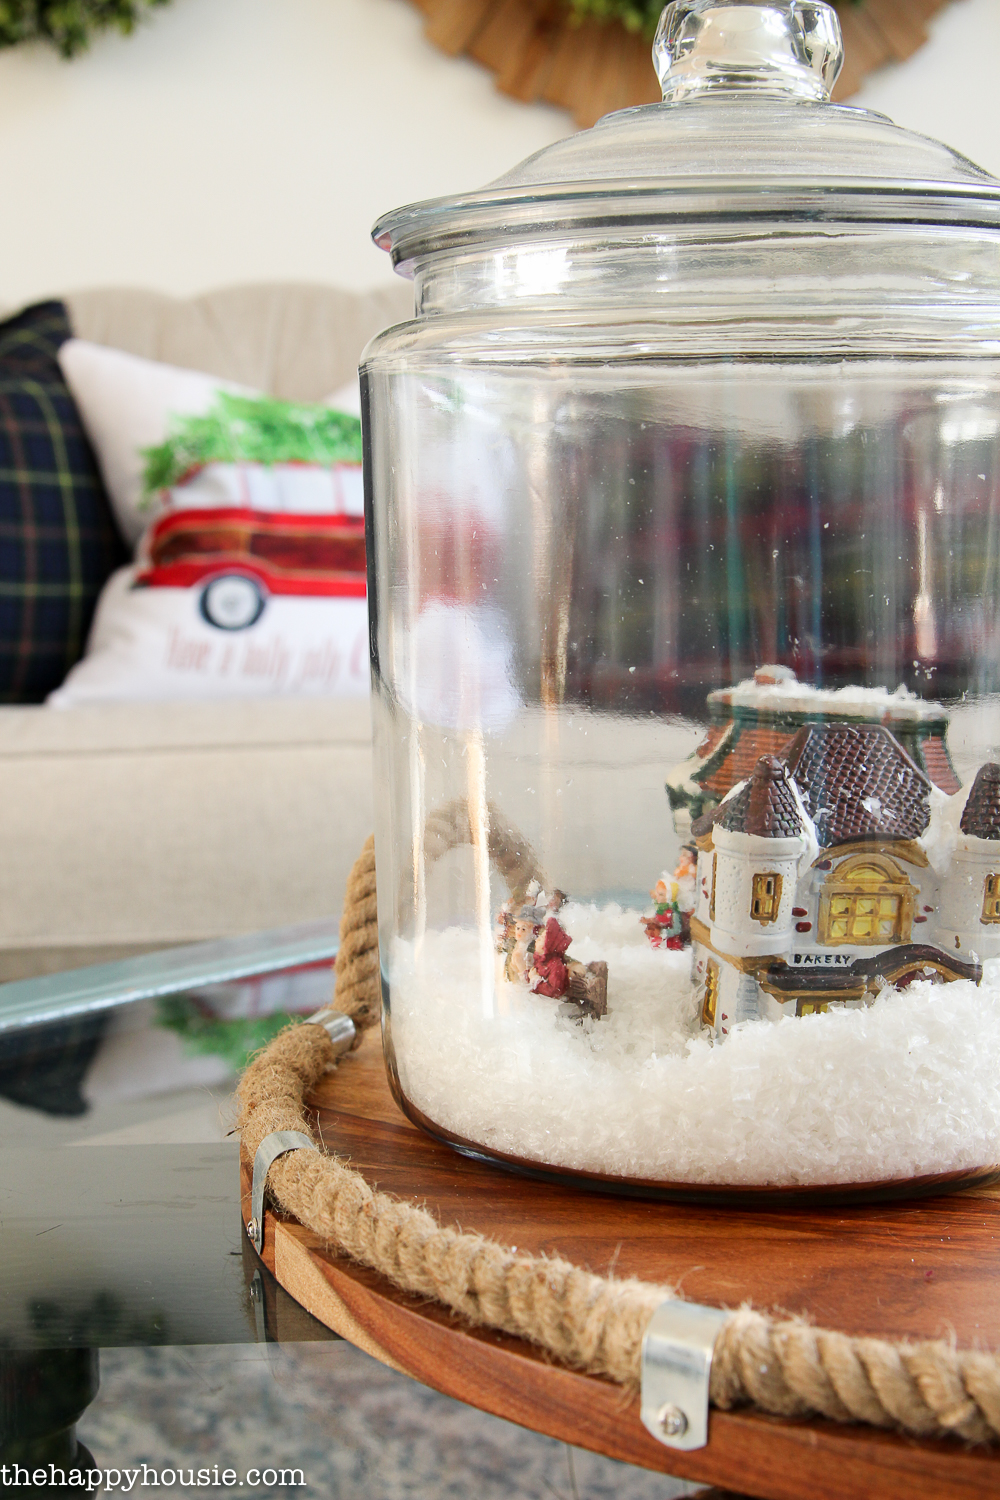 There is a glass jar with a holiday village inside it.